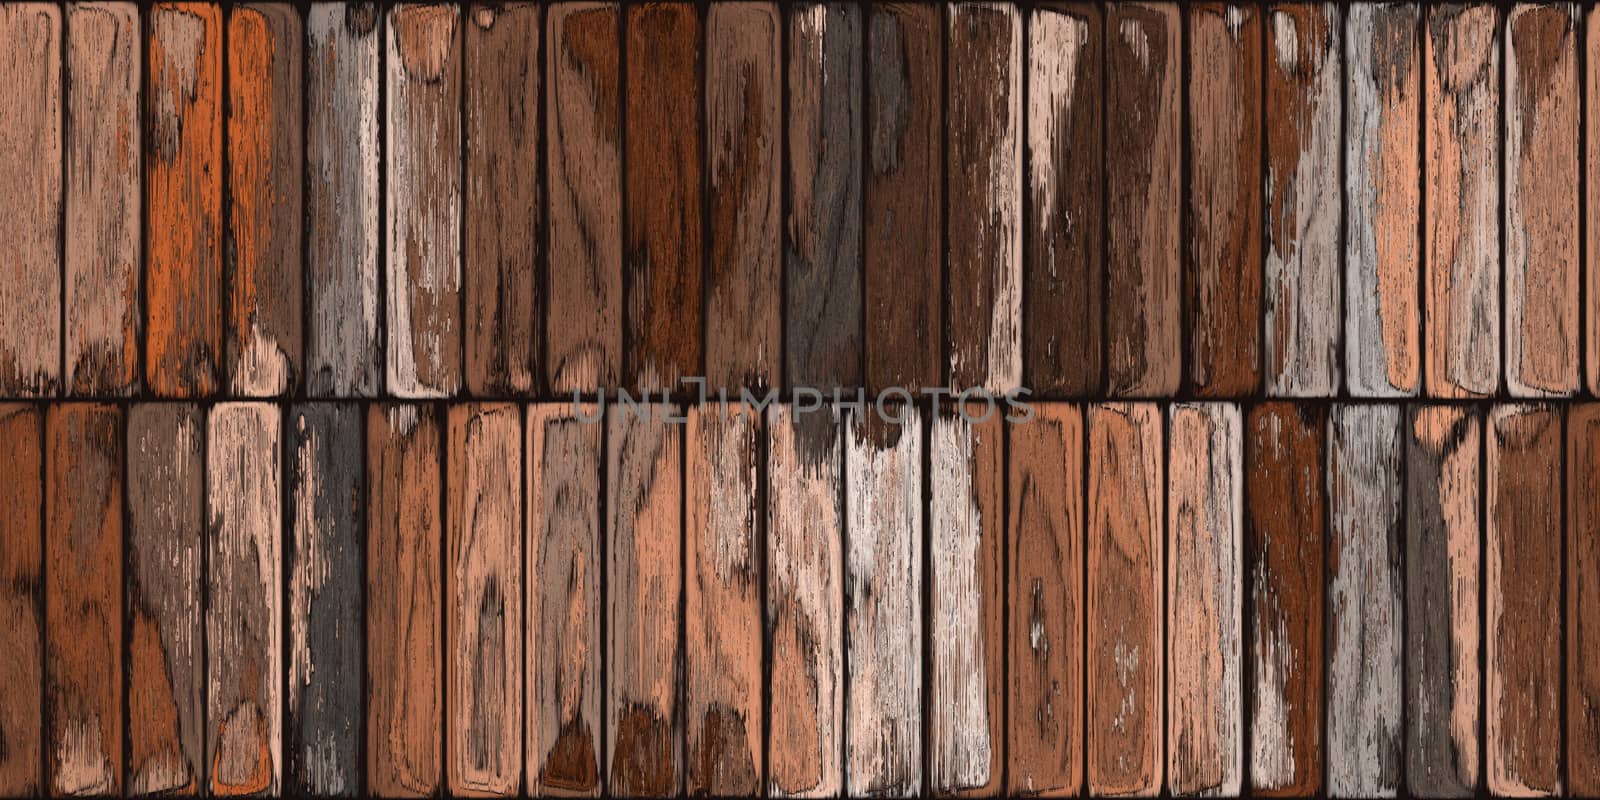 Colored Old Painted Planks Background. Vintage Rough Wooden Paint Backdrop.